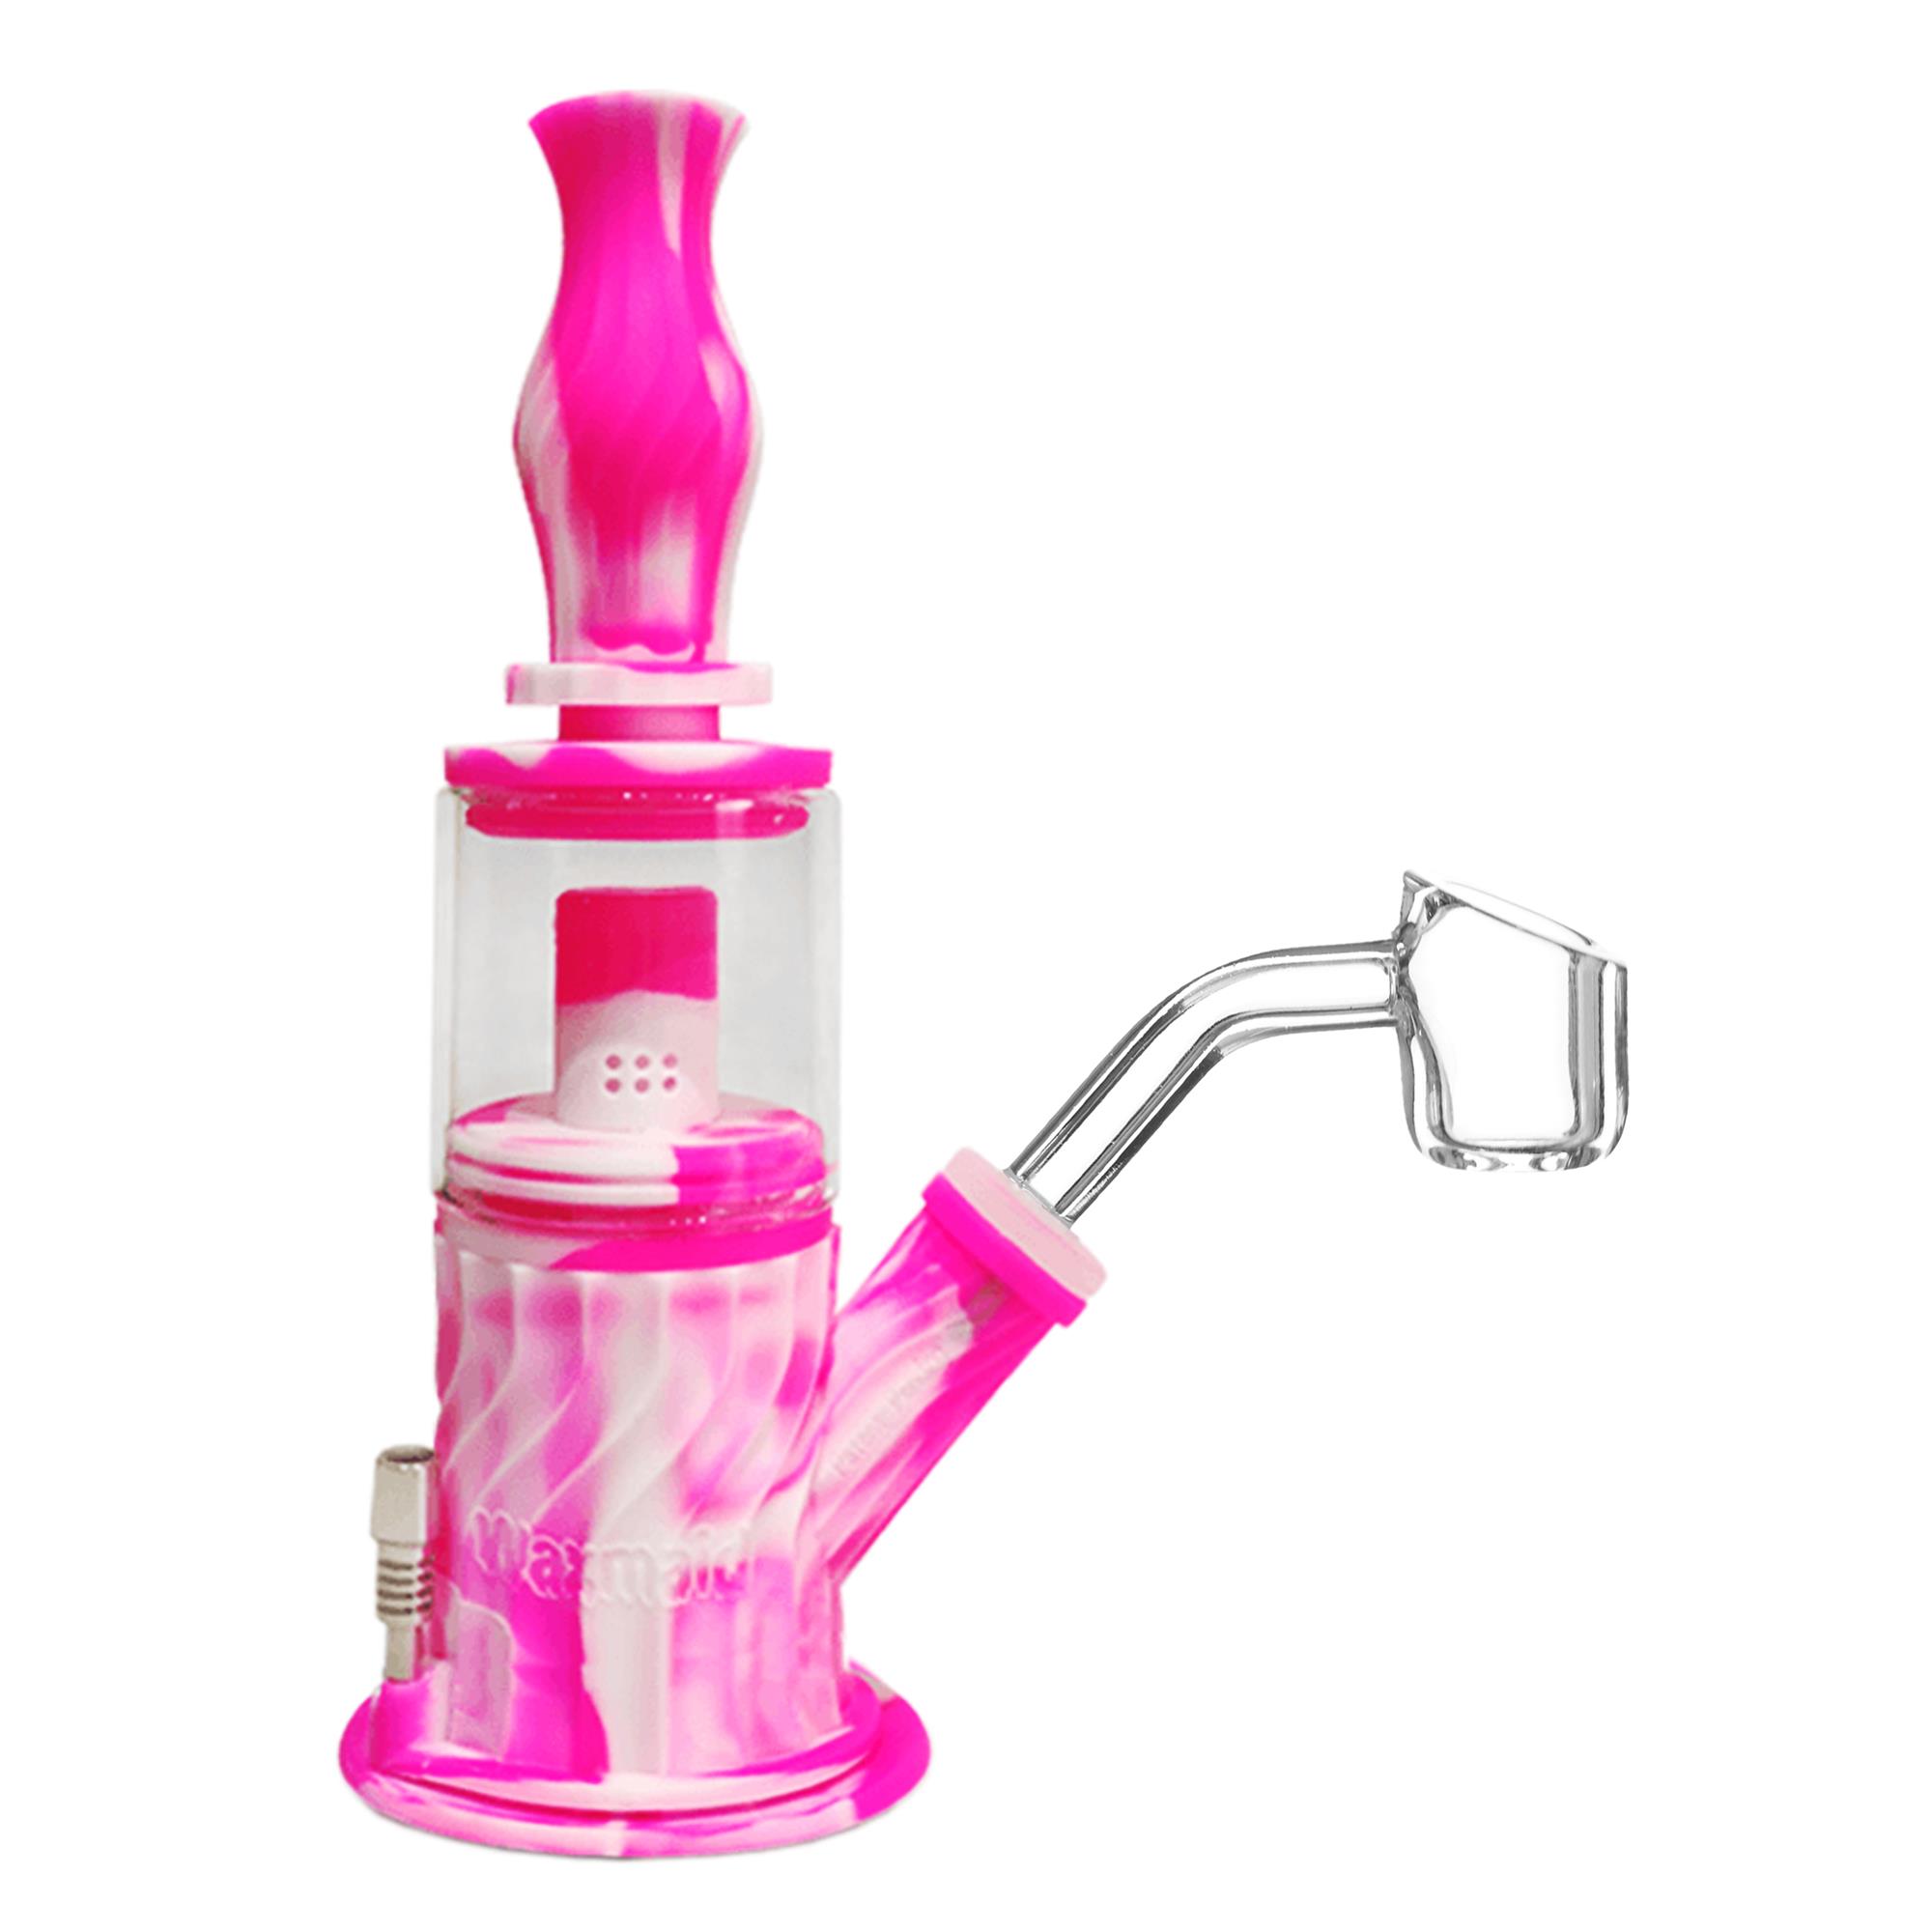 SILICONE 4 IN 1 DAB RIG BONG